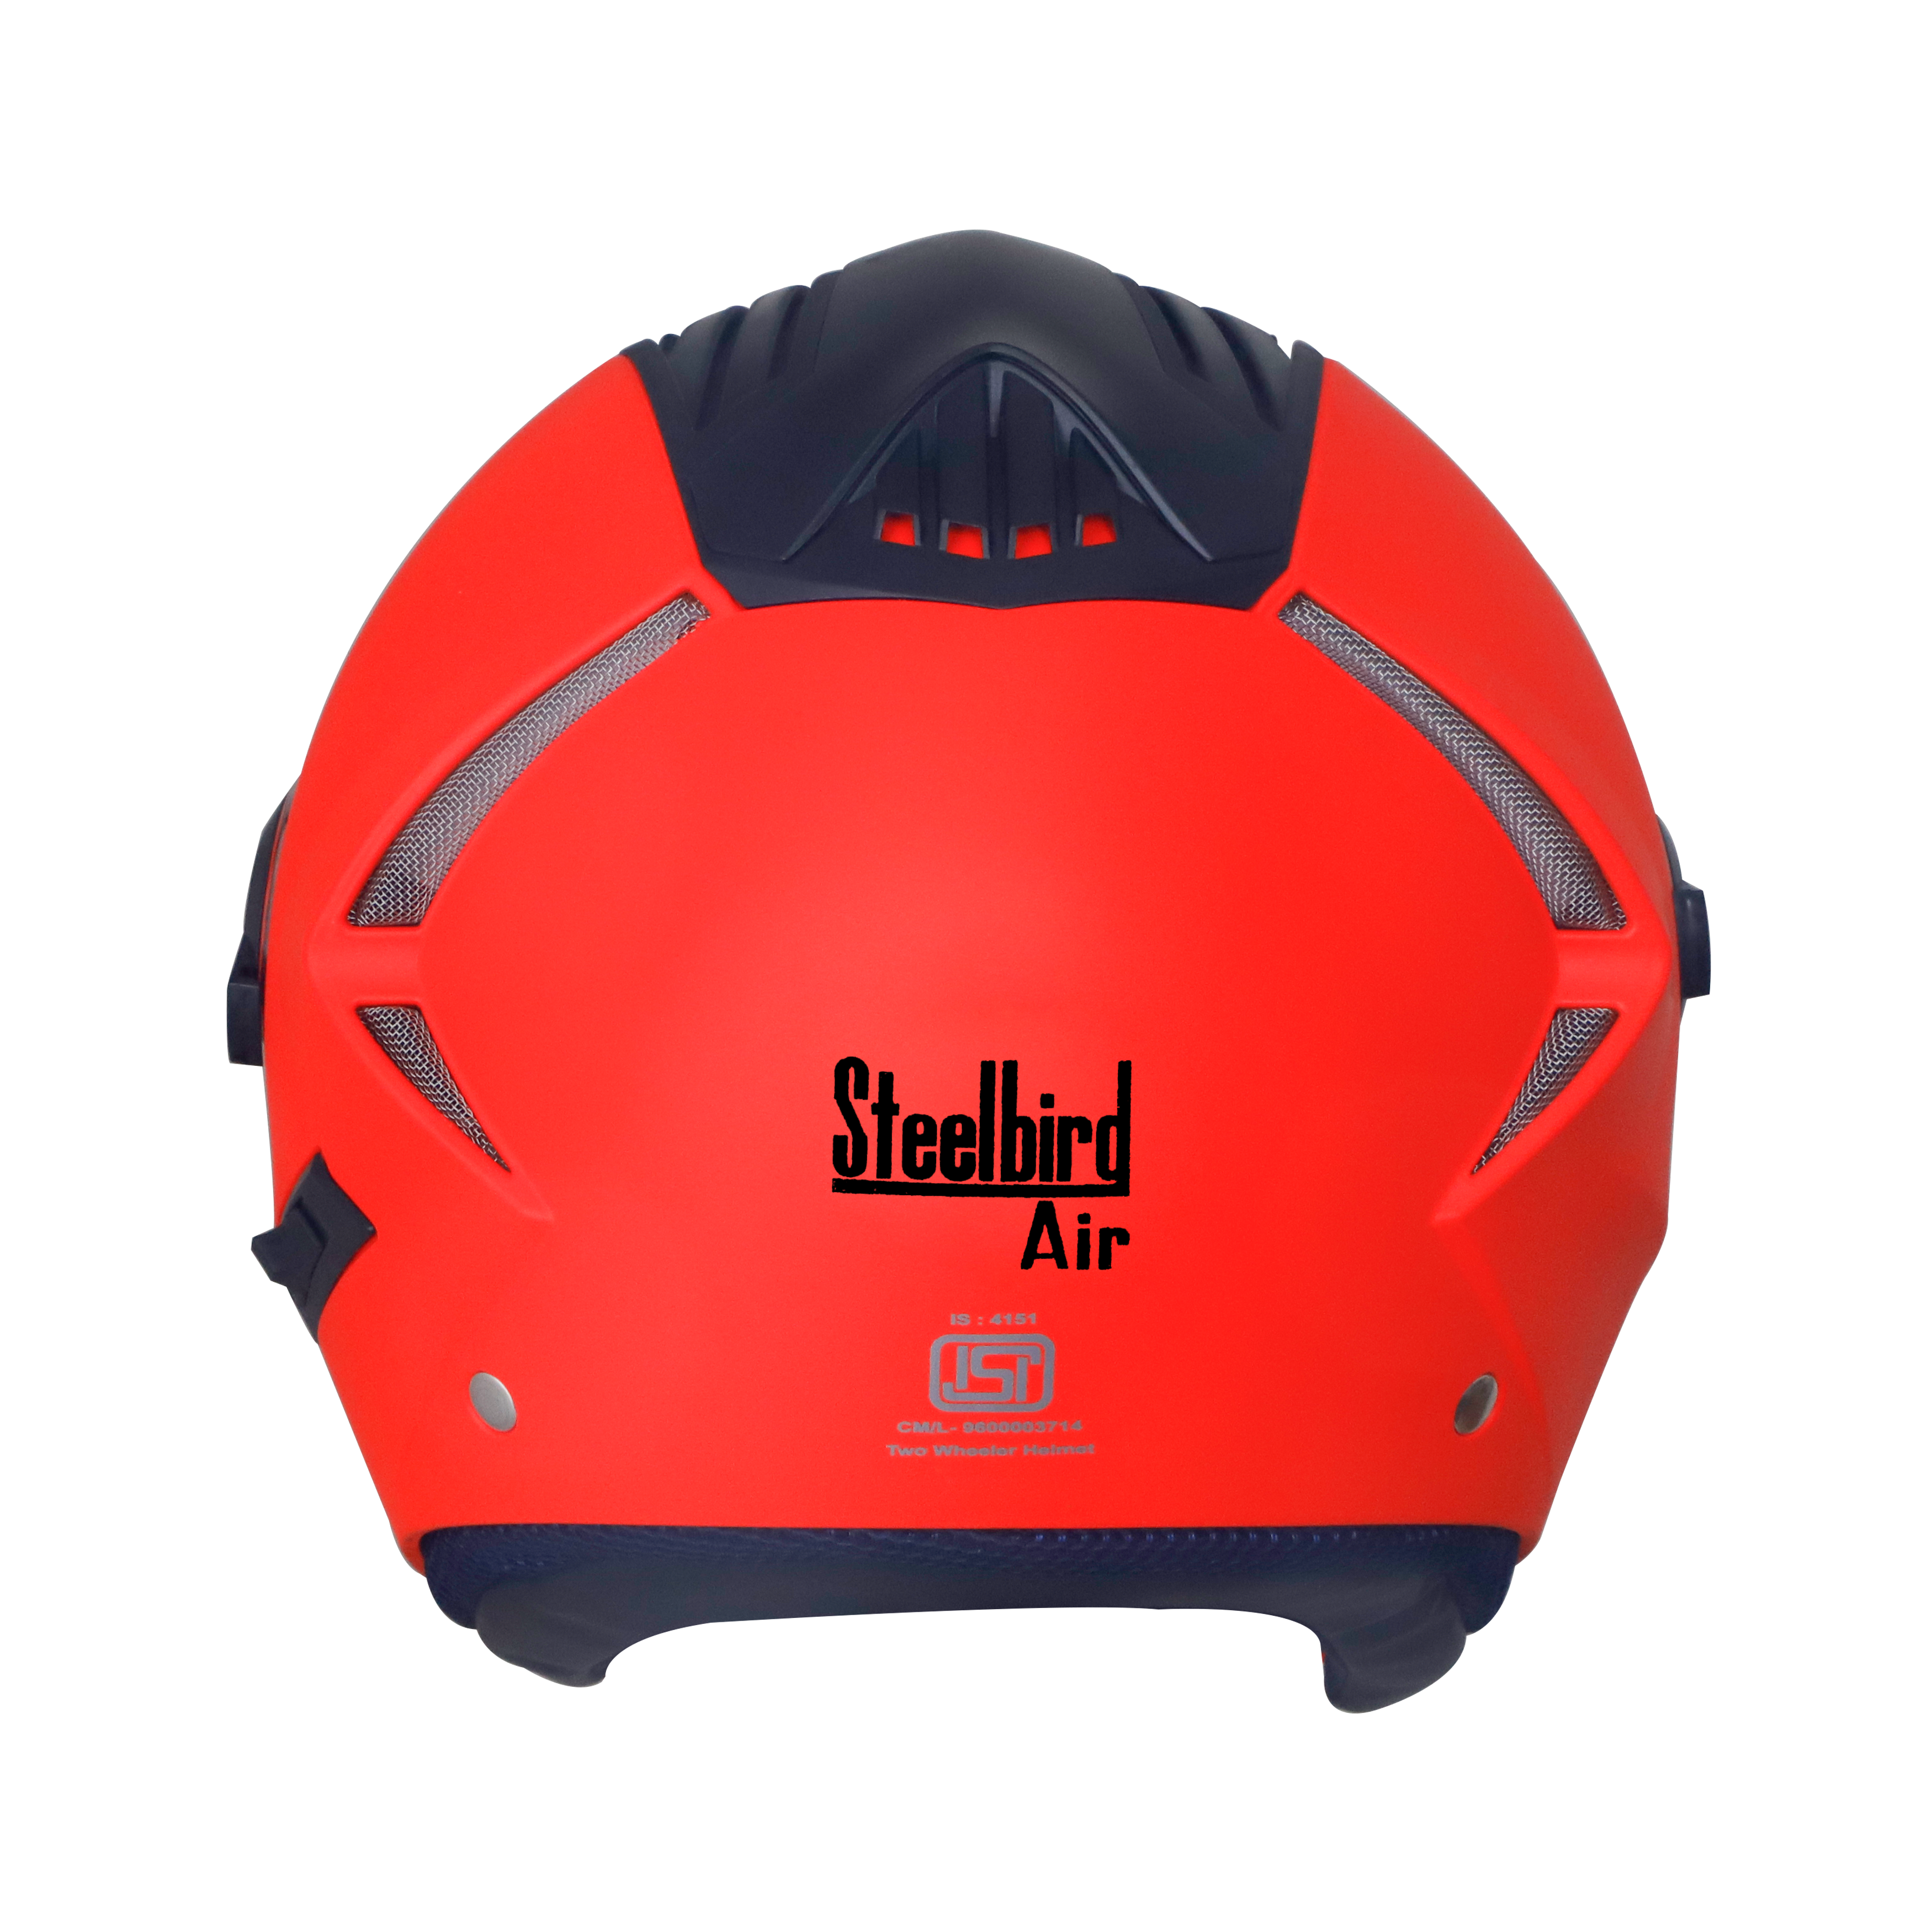 SBA-2 GLOSSY FLUO RED WITH CHROME SILVER INNER SUN SHIELD